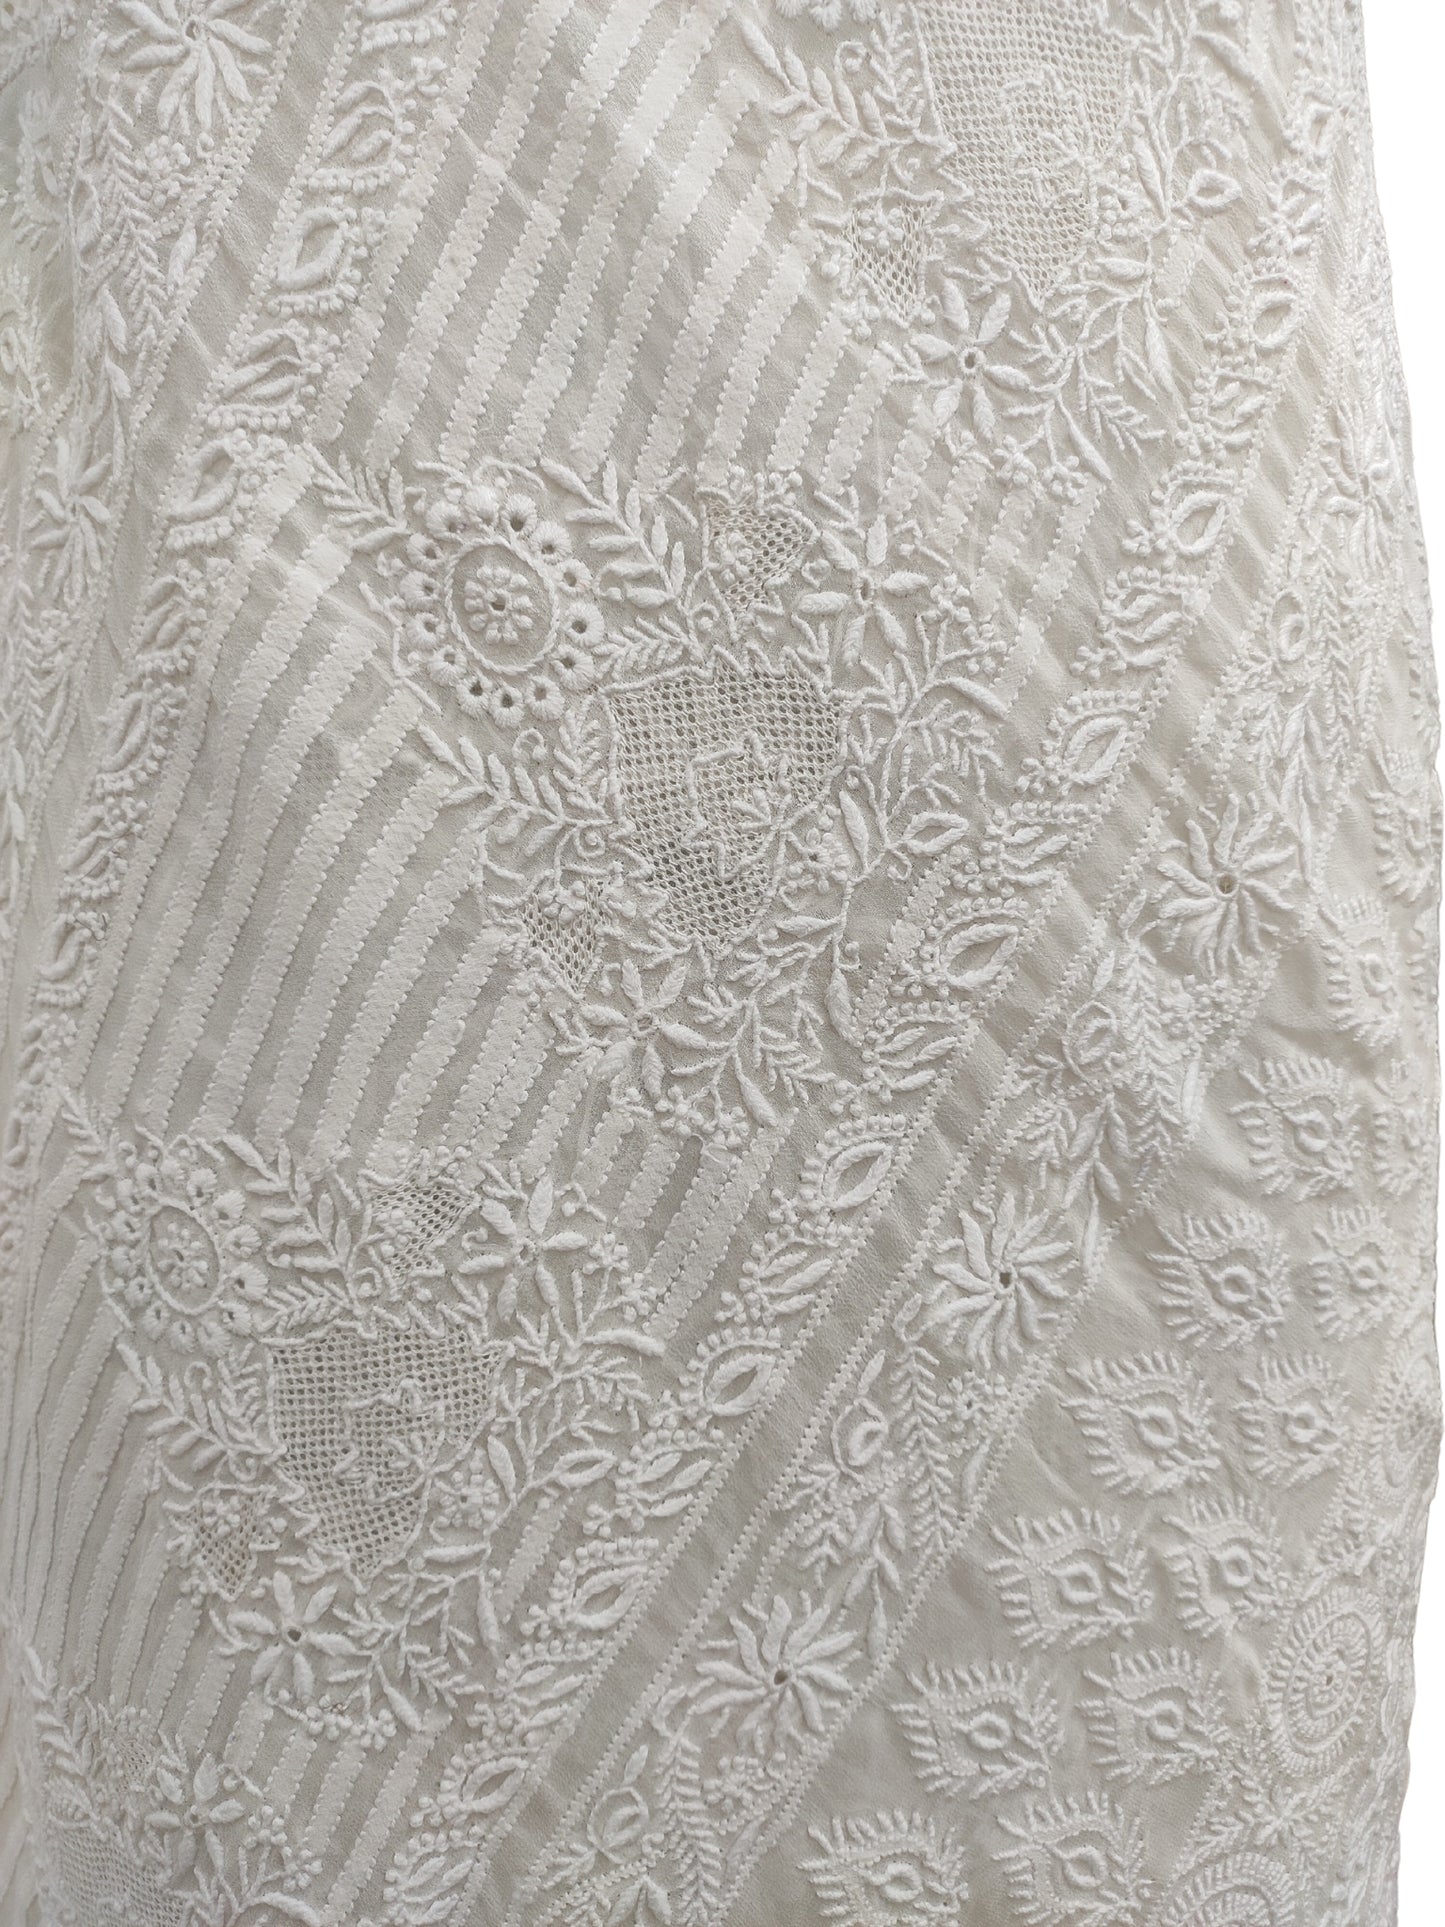 Shyamal Chikan Hand Embroidered White Pure Georgette Lucknowi Chikankari Saree With Blouse Piece  - S21025